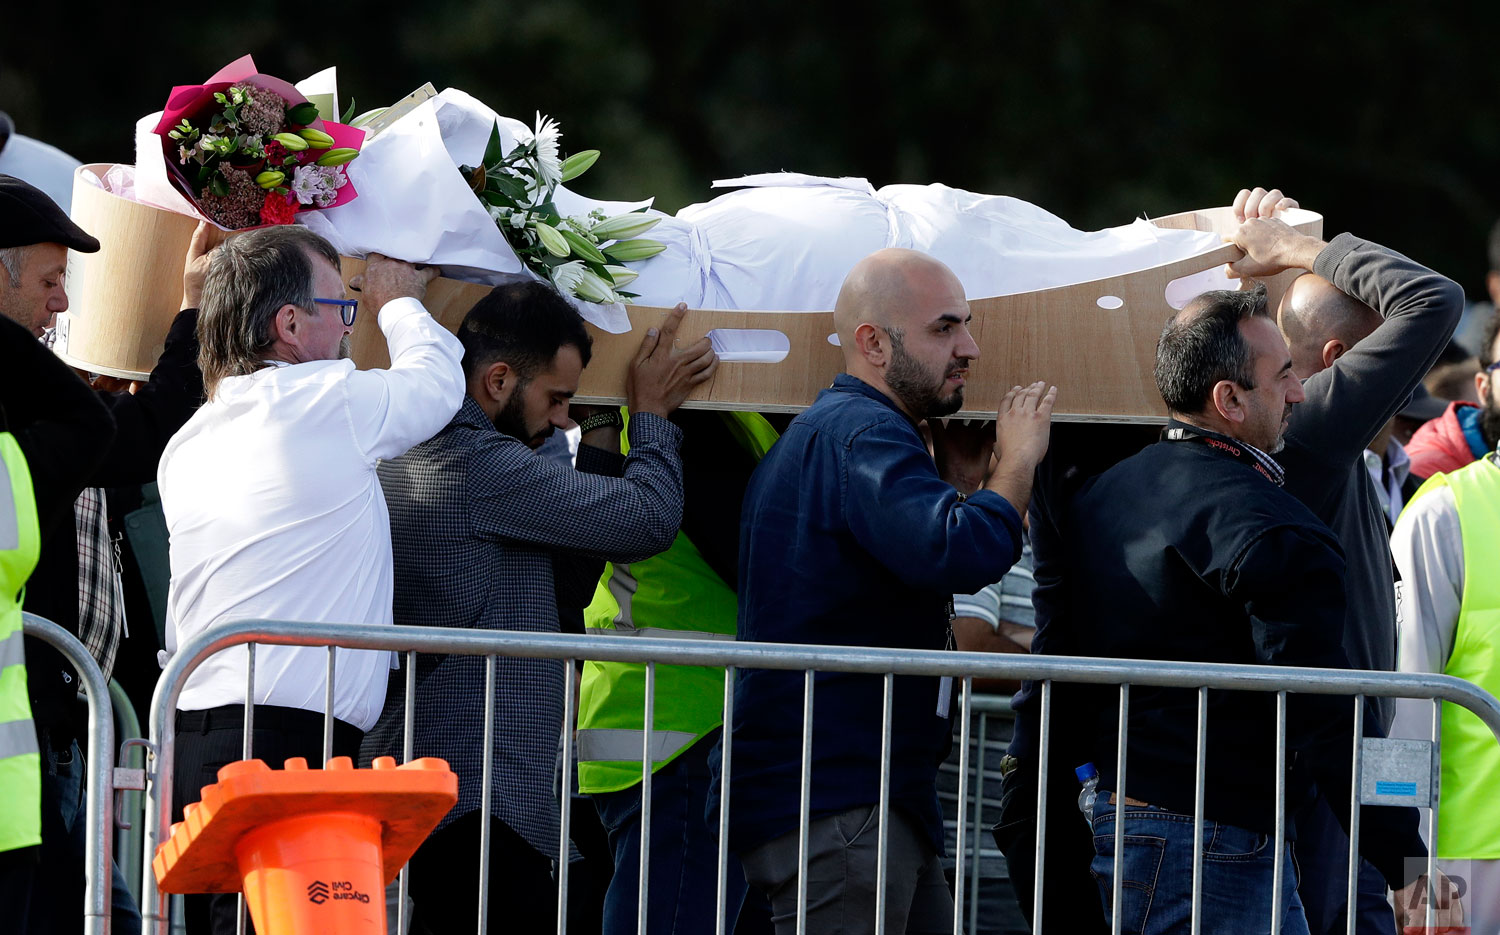  Mourners carry a body at Memorial Park Cemetery in Christchurch, New Zealand, Friday, March 22, 2019. Funerals continued following the March 15 mosque attacks where 50 worshippers were killed by a white supremacist.  (AP Photo/Mark Baker) 